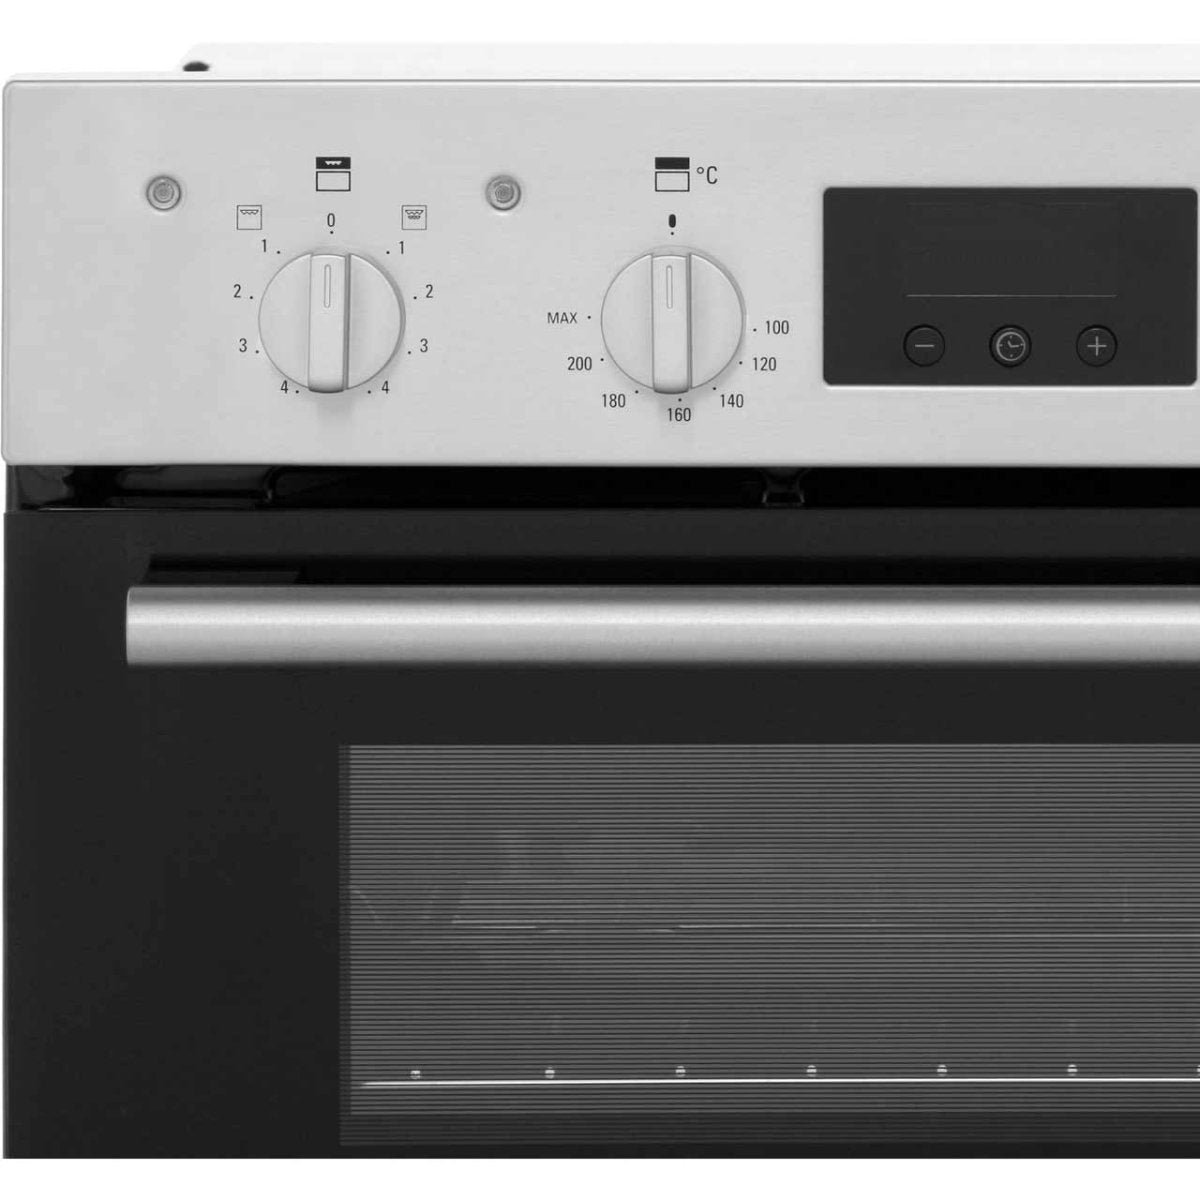 Hotpoint Class 2 DD2540BL Built In Electric Double Oven - Black - A/A Rated | Atlantic Electrics